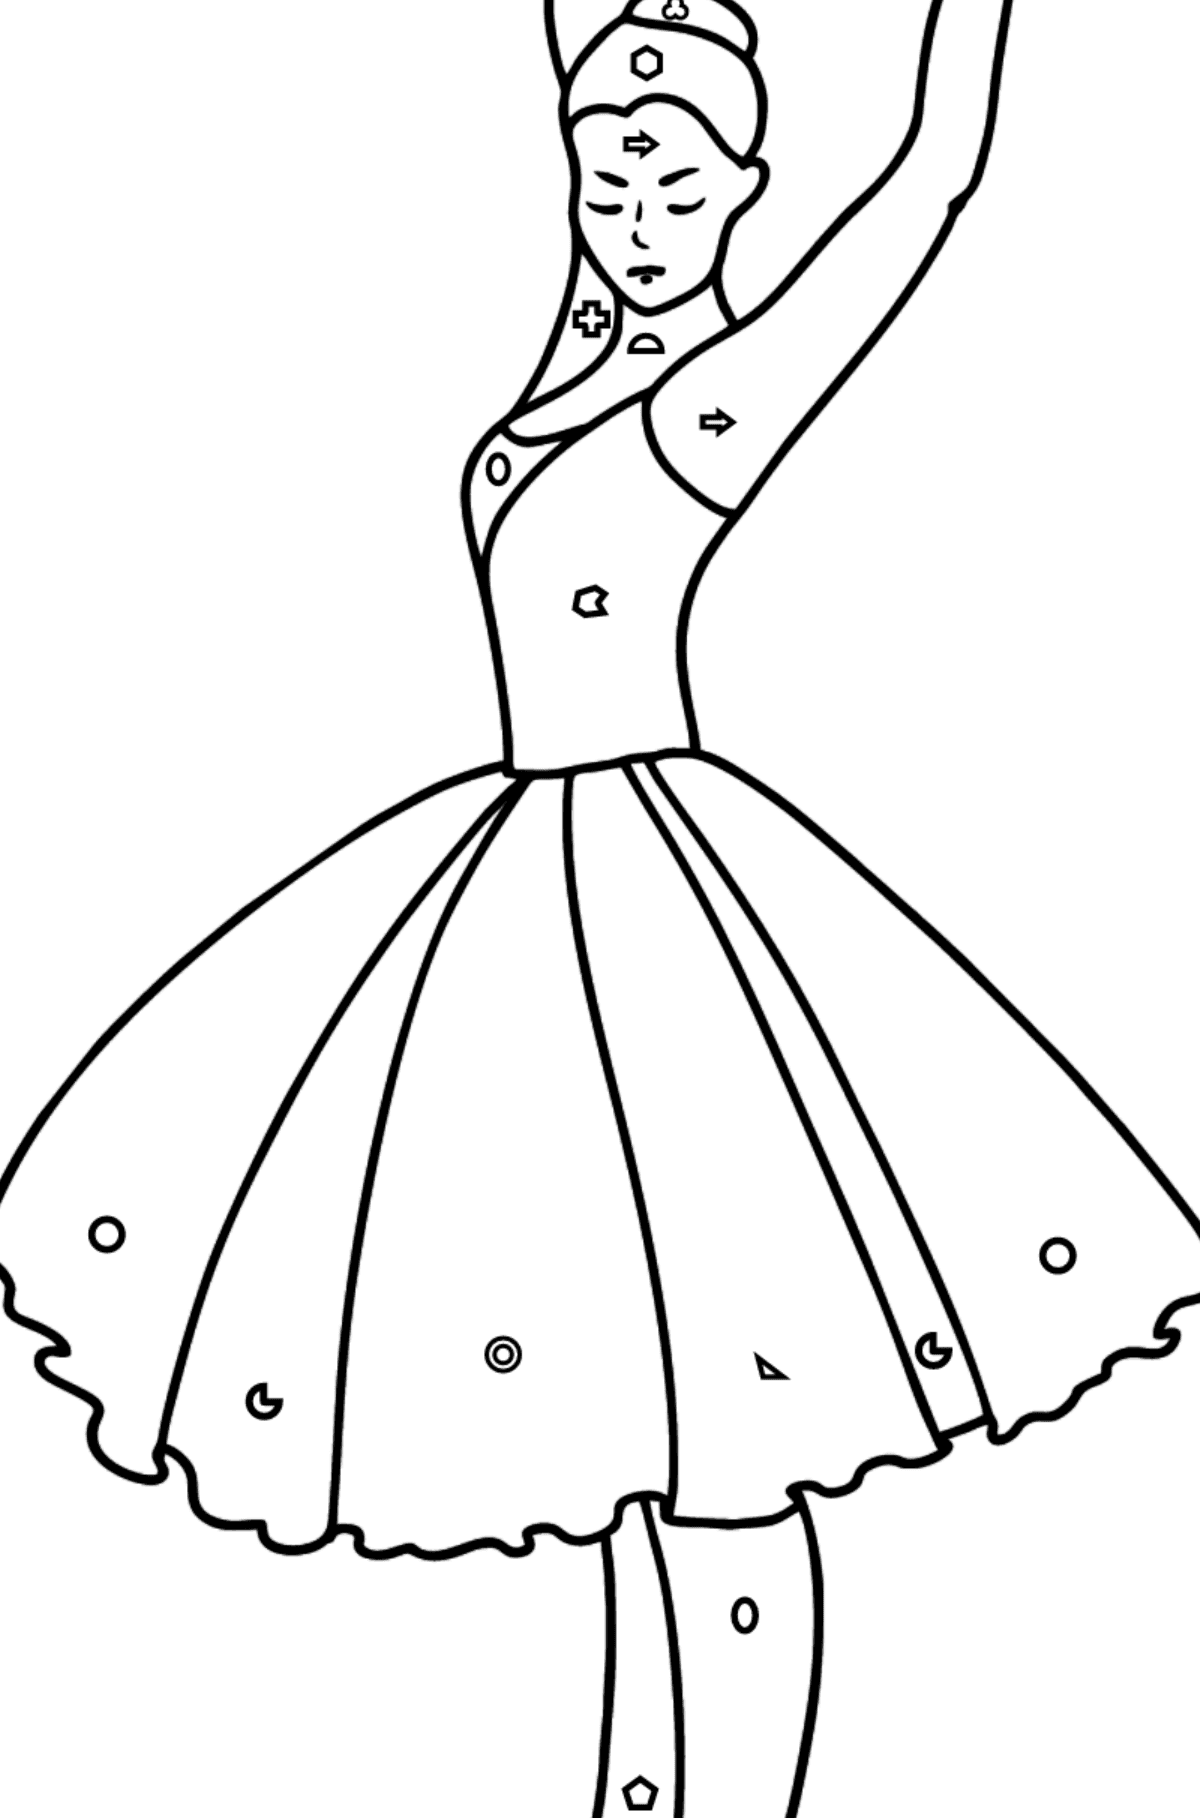 Ballerina Dancing coloring page - Coloring by Geometric Shapes for Kids